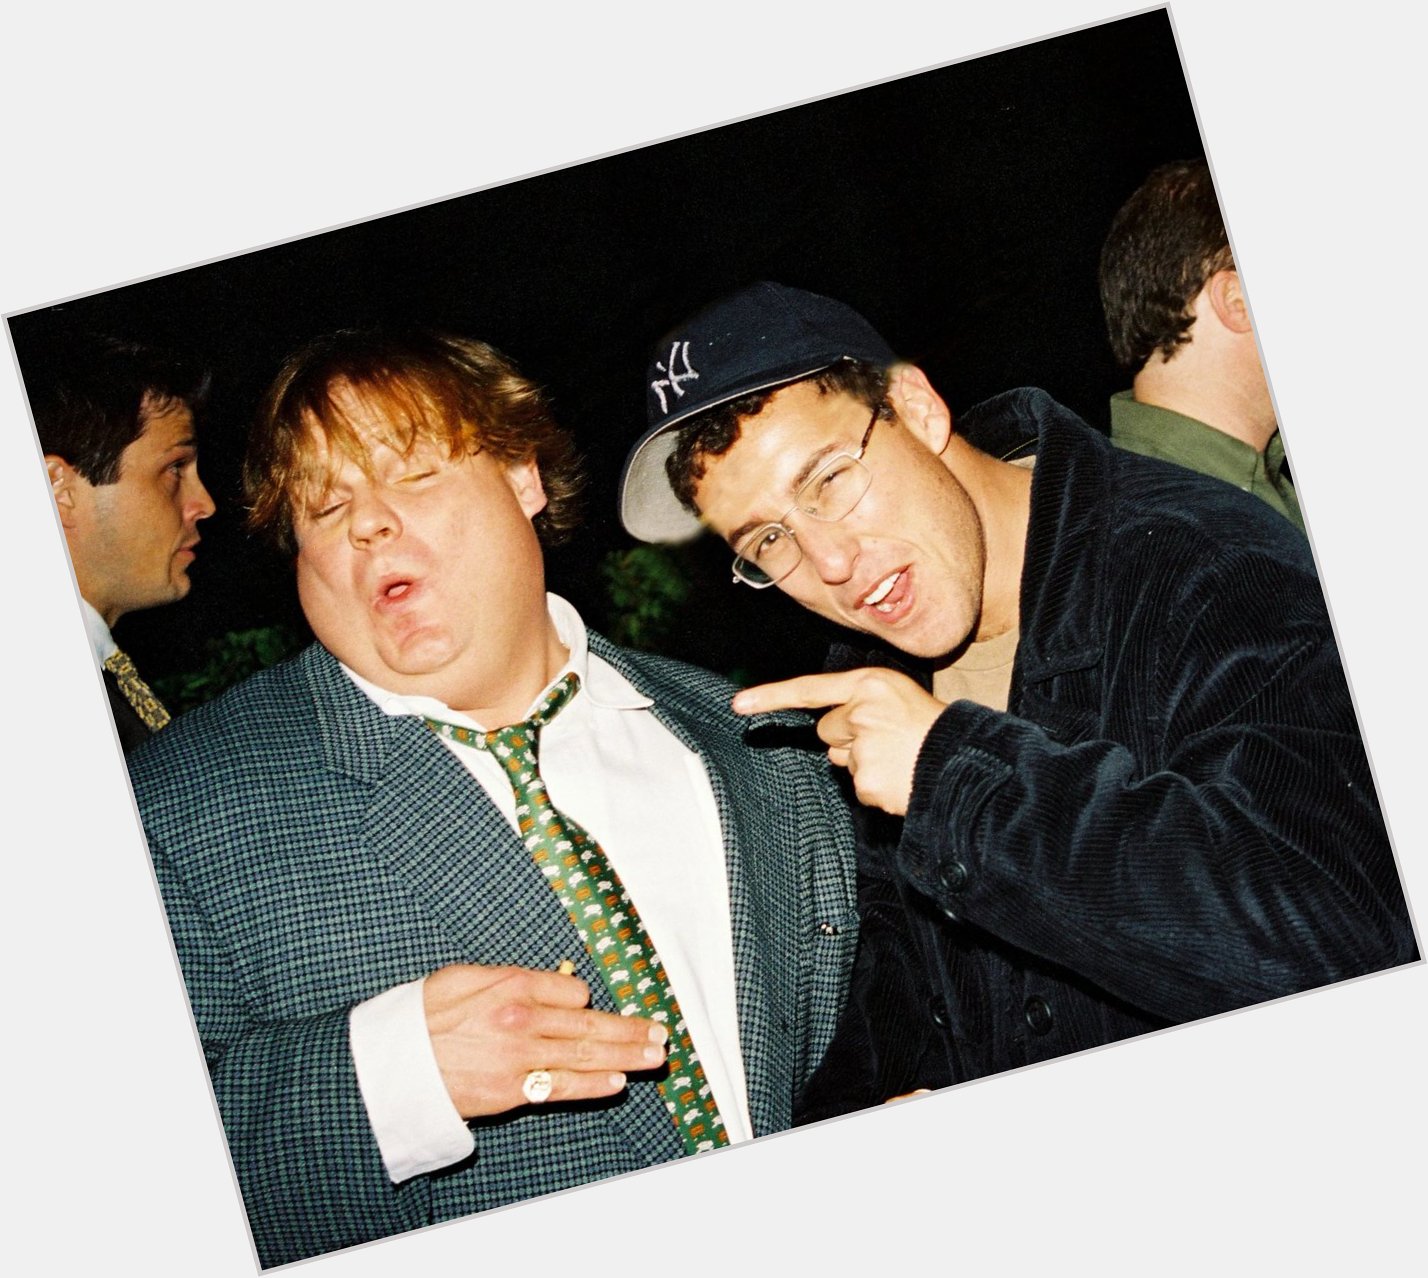 Also happy birthday to the big man and Wisconsin legend himself, Chris Farley 